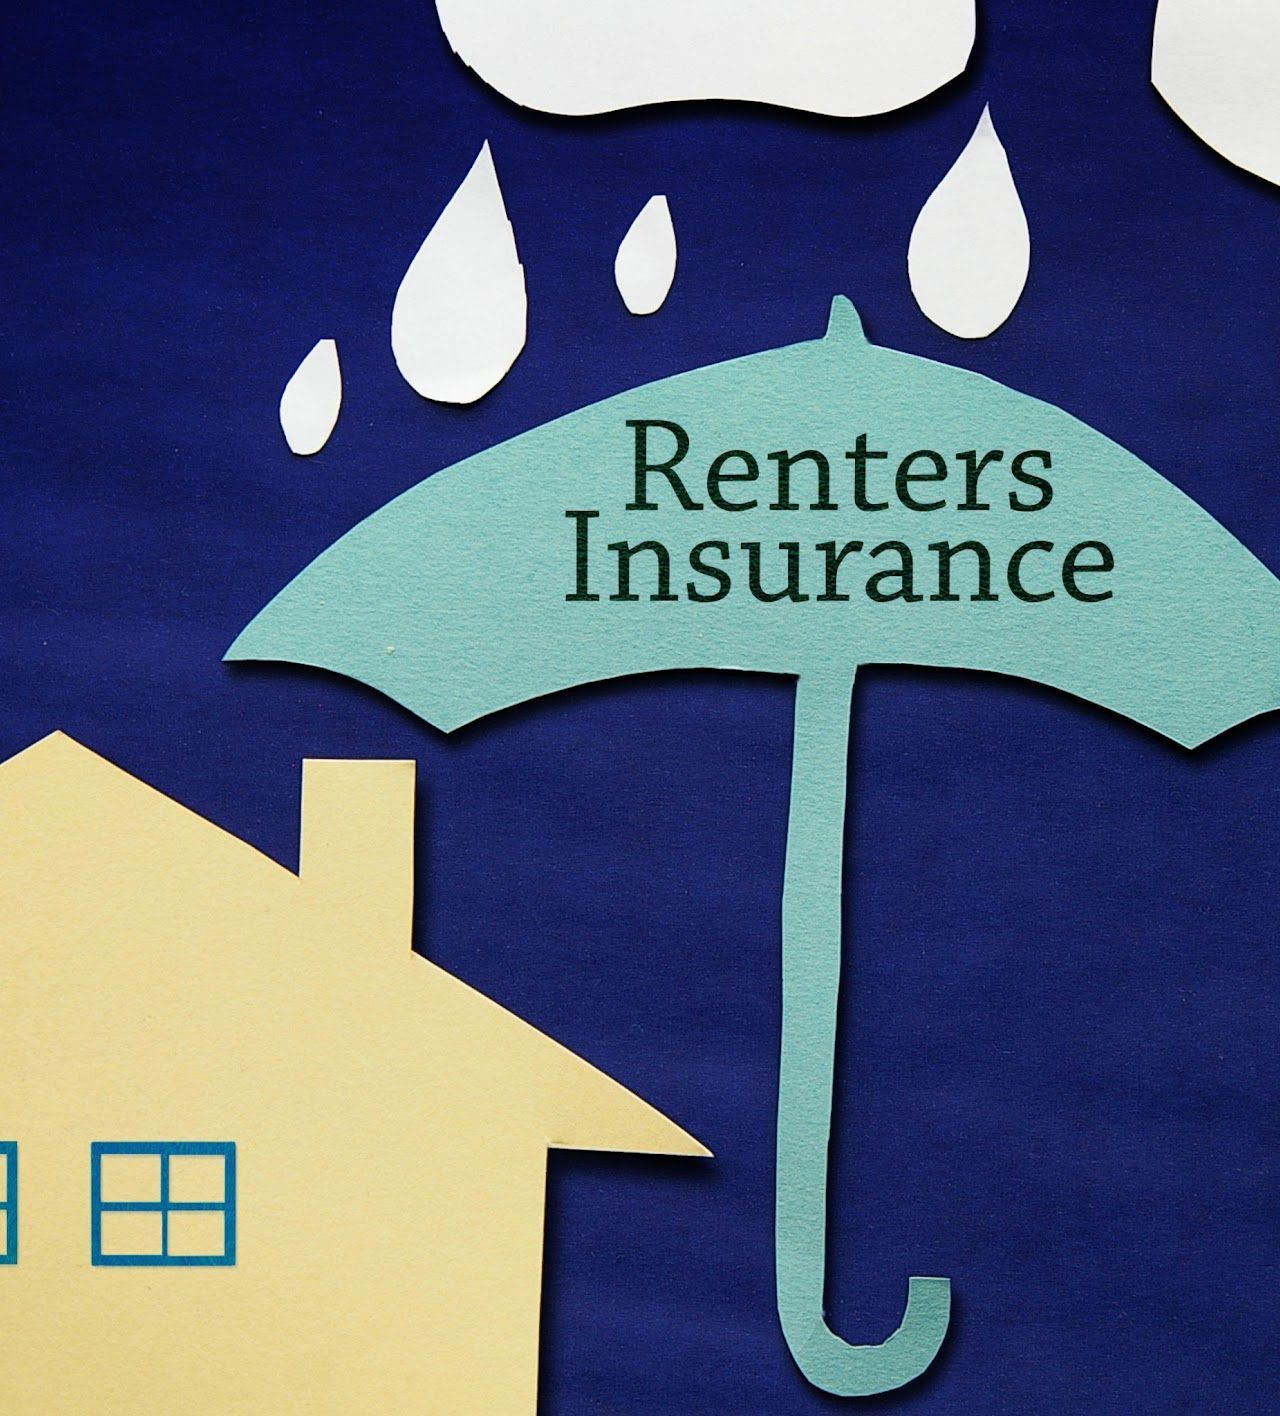 a house is under an umbrella that says renters insurance